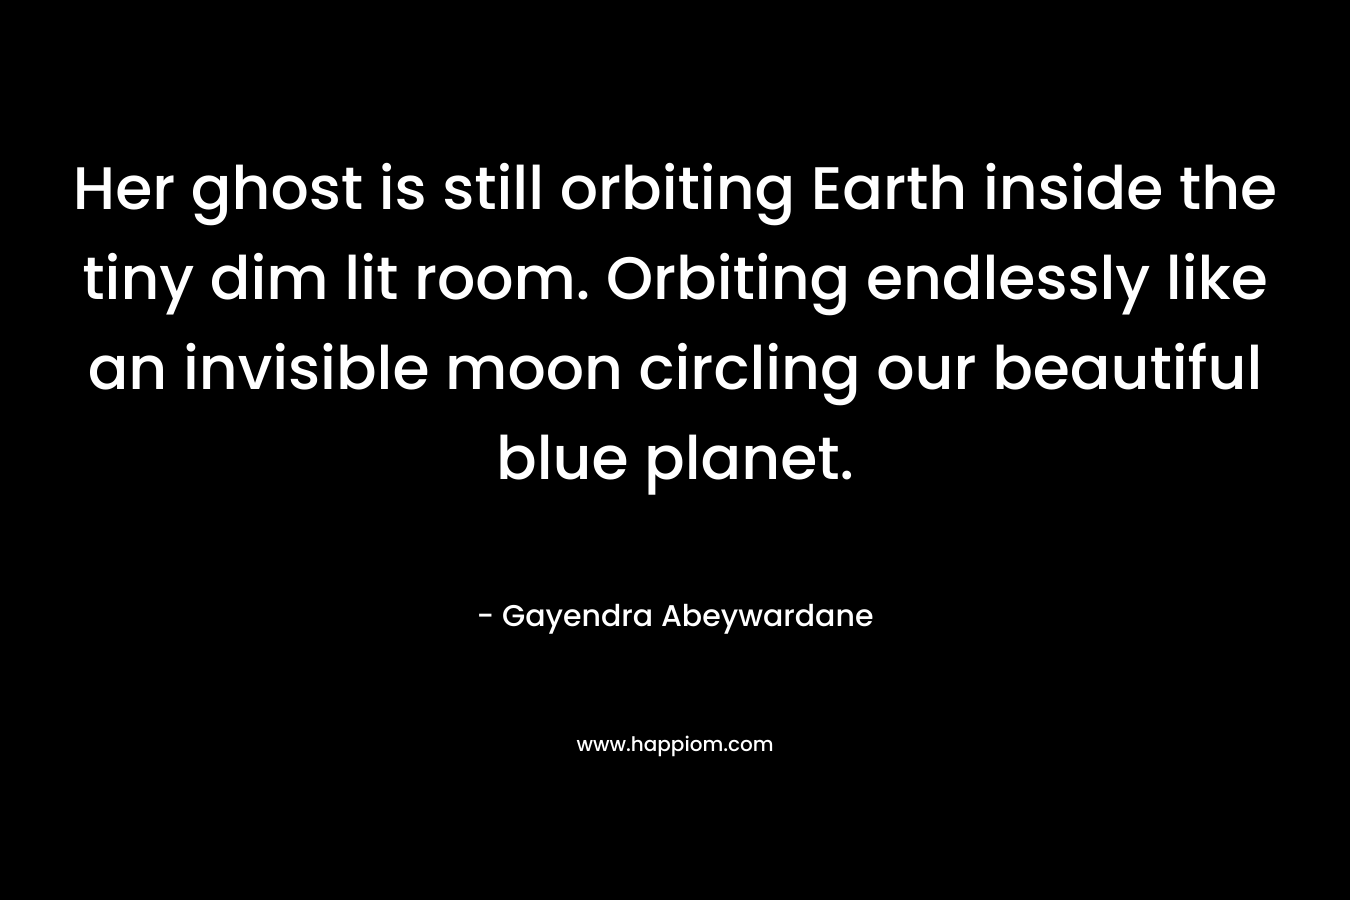 Her ghost is still orbiting Earth inside the tiny dim lit room. Orbiting endlessly like an invisible moon circling our beautiful blue planet. – Gayendra Abeywardane